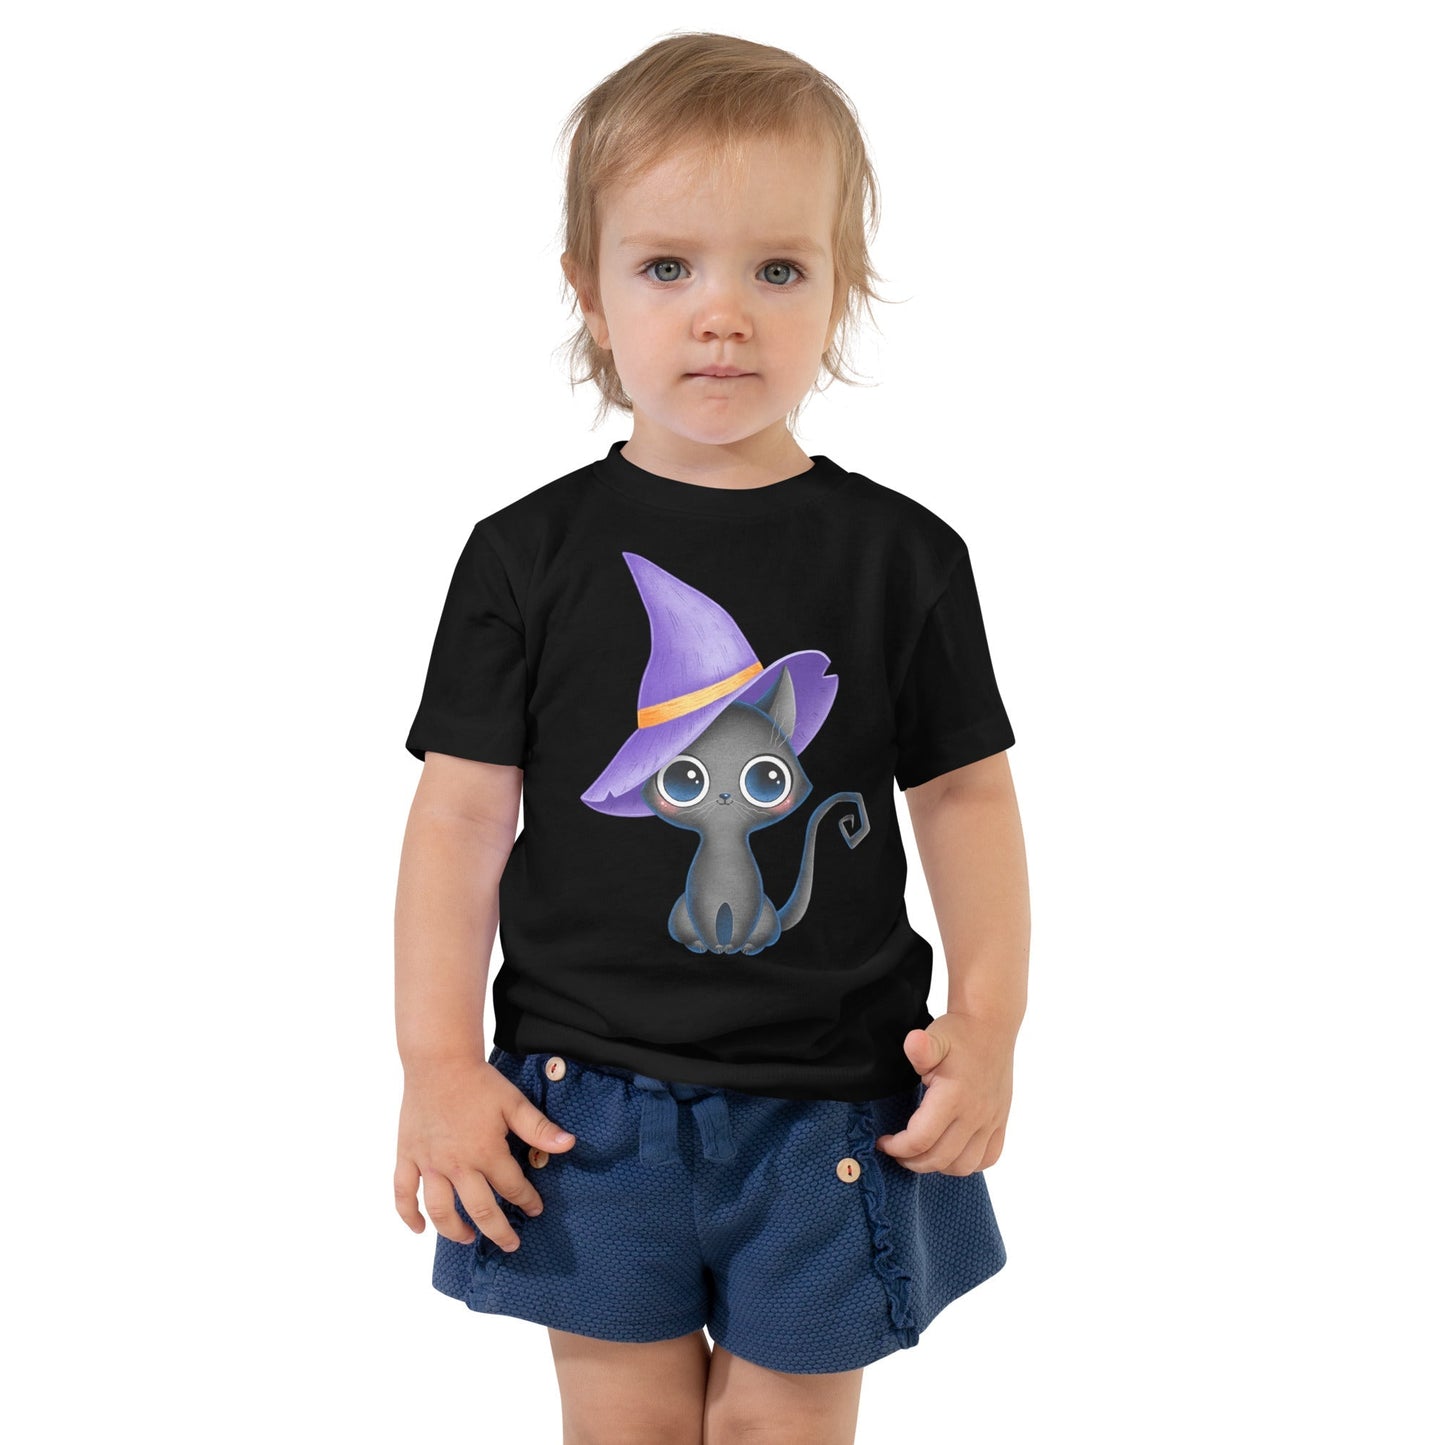 Toddler Cat Graphic T-Shirt | Cute Graphic Halloween Tee